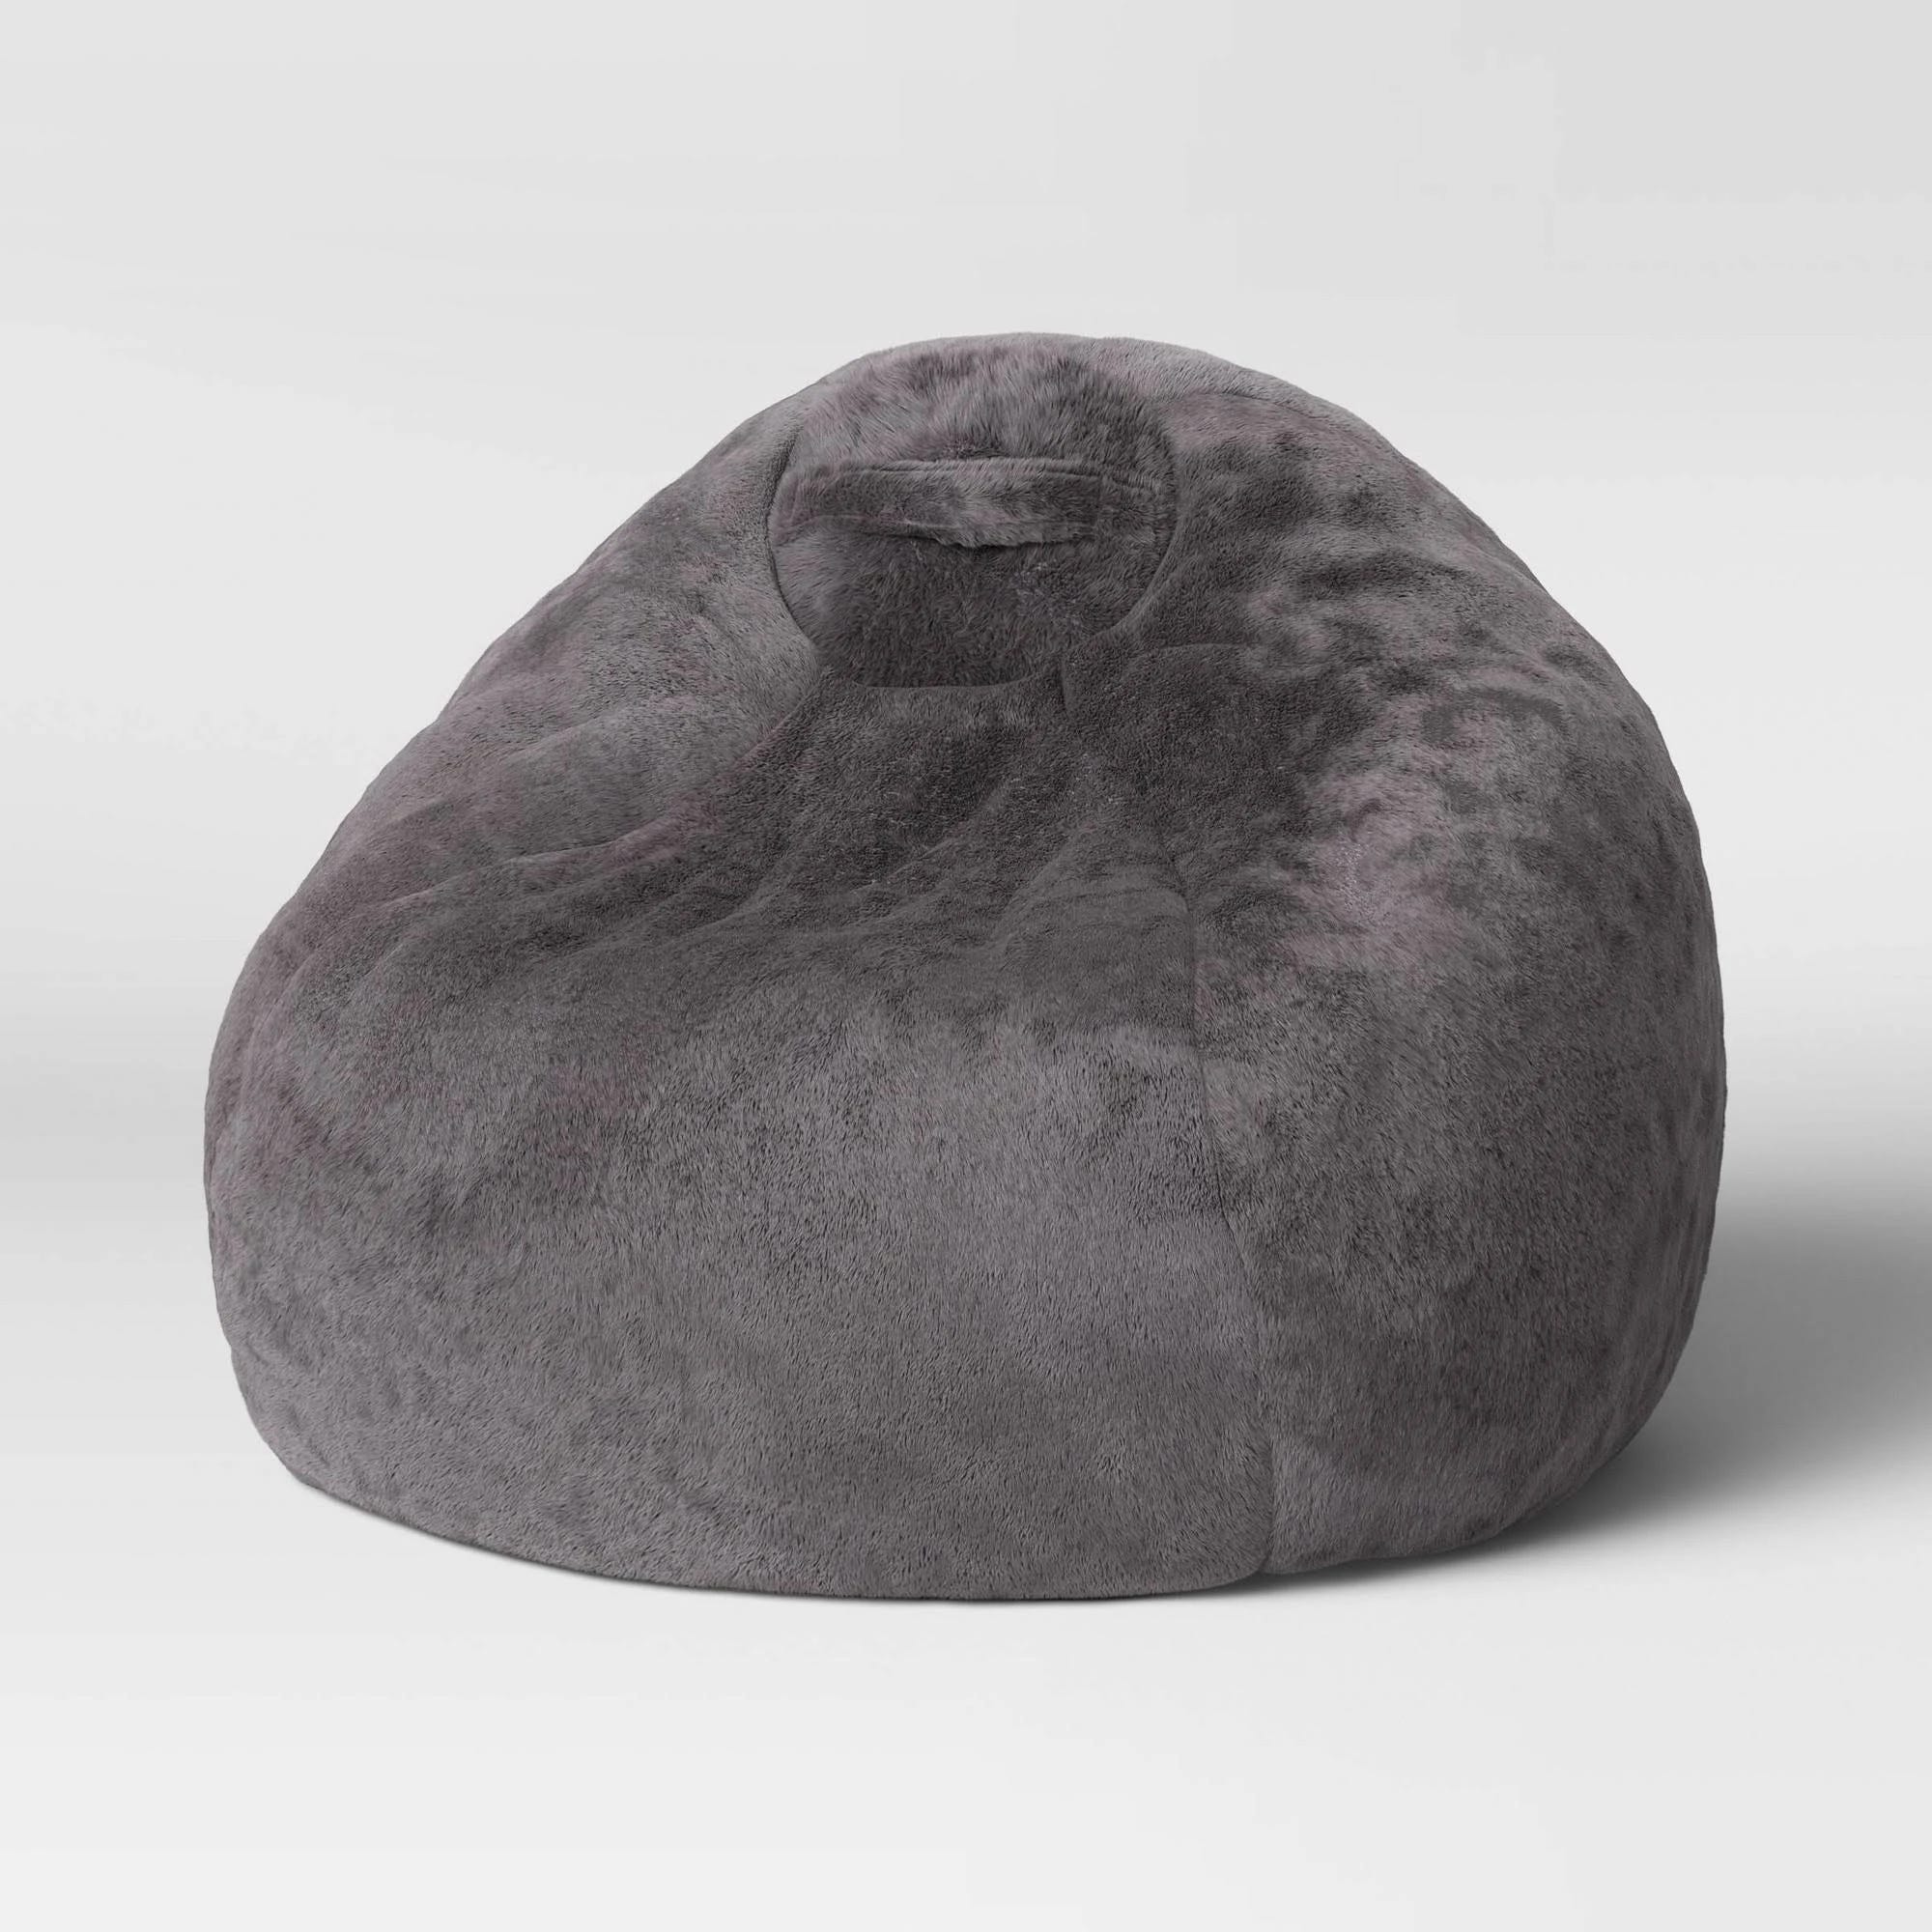 Comfy Fuzzy Bean Bag Chair for Kids | Image